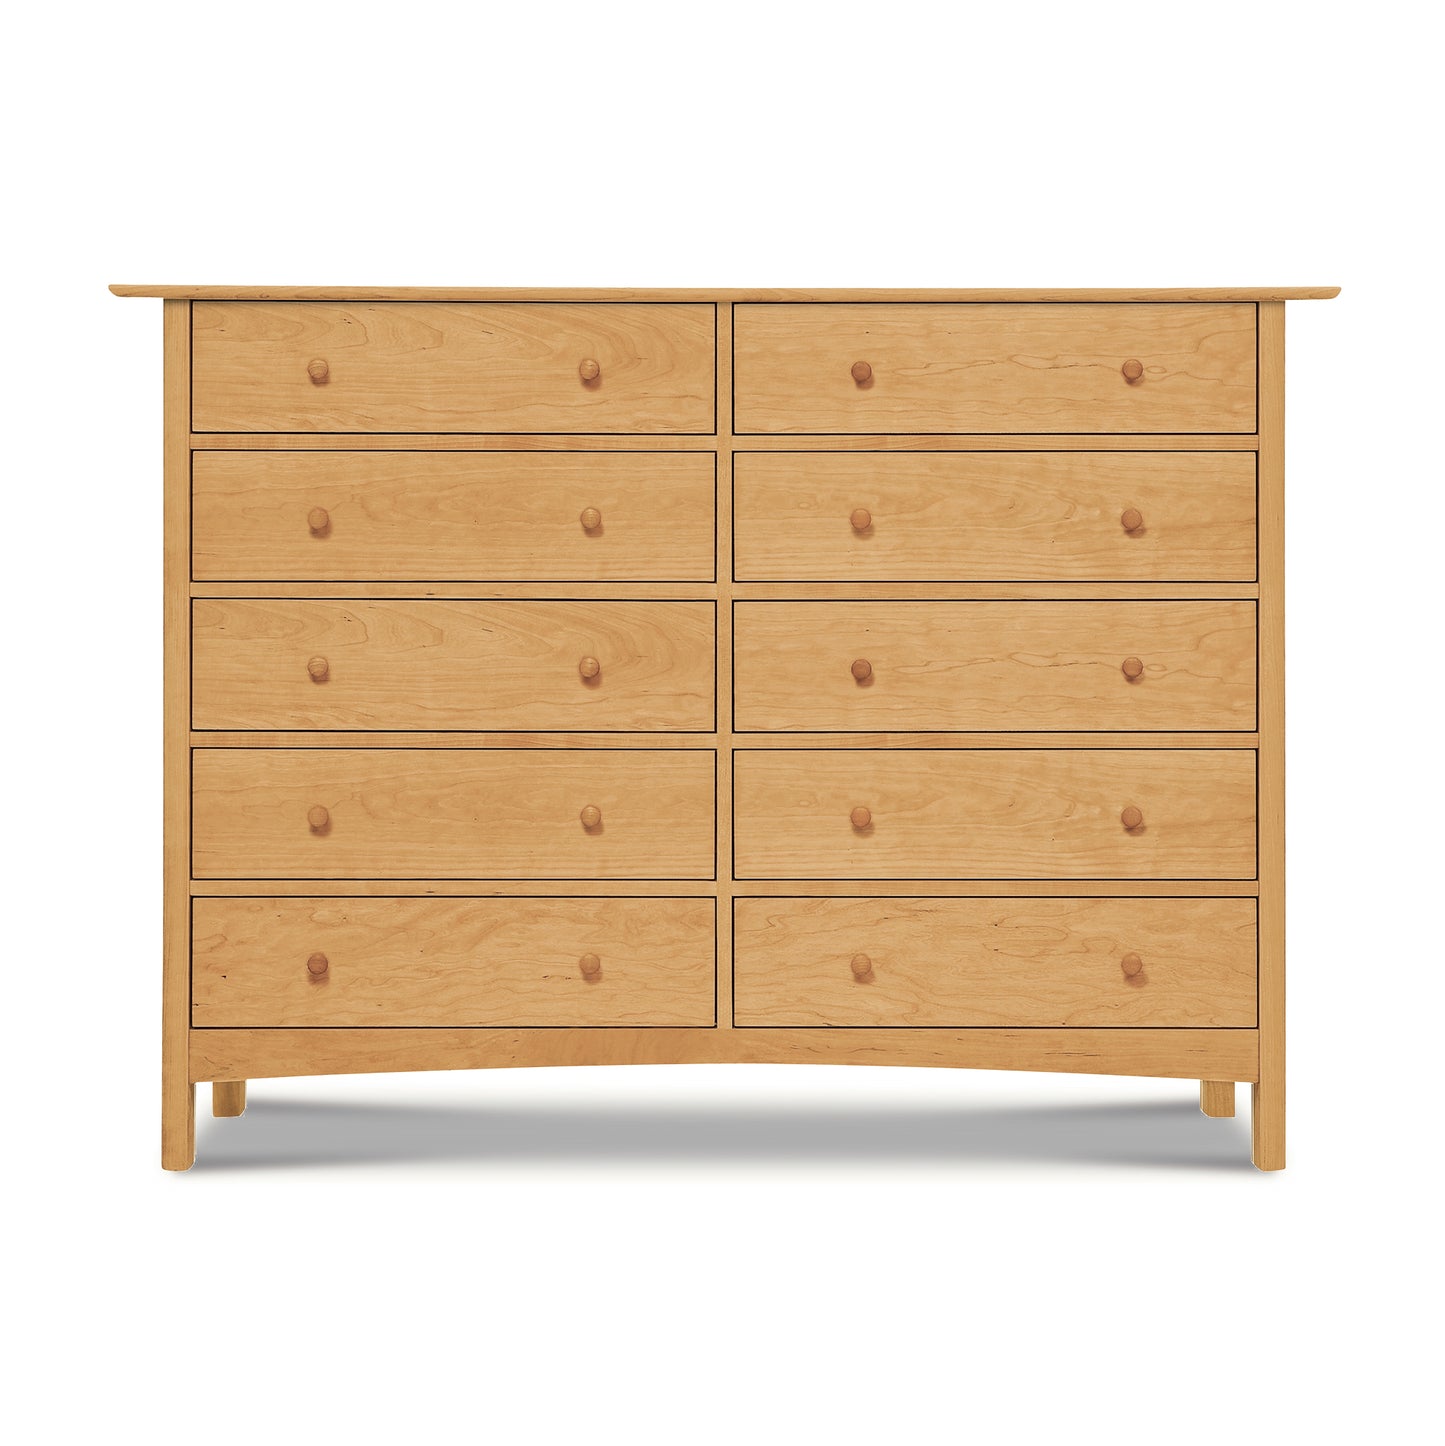 A Heartwood Shaker 10-Drawer Dresser by Vermont Furniture Designs with drawers on a white background.